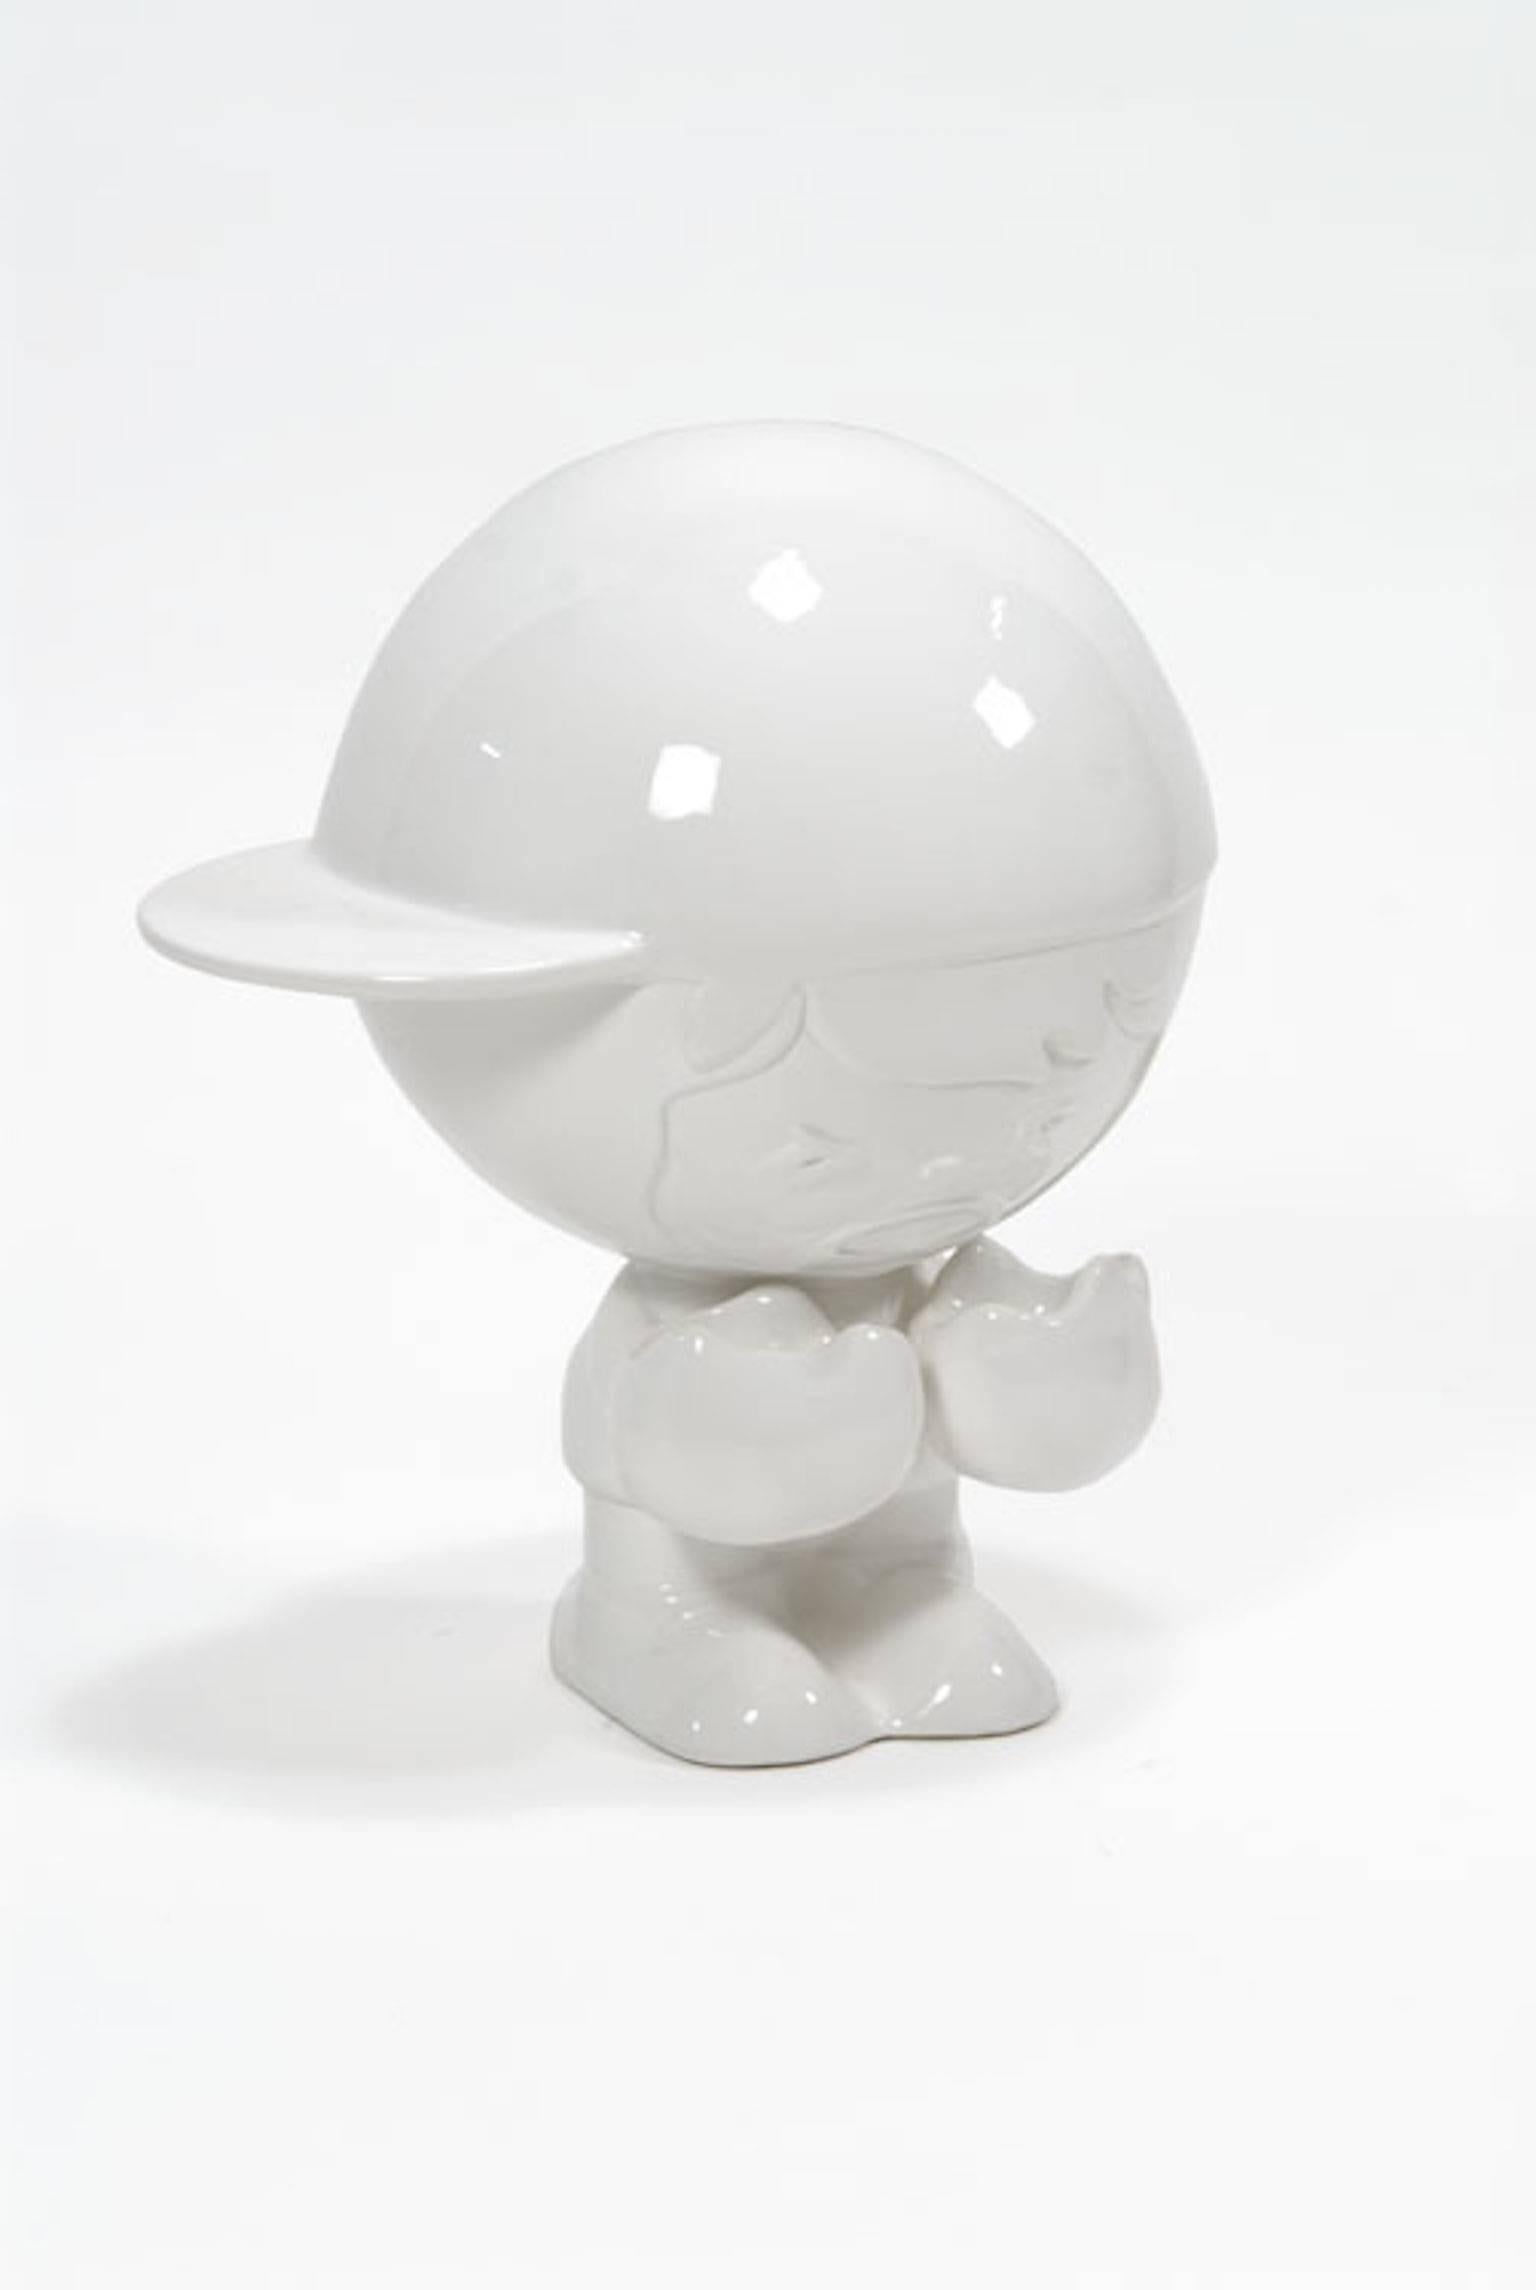 Ceramic sculptures Tvboy collection, designed by Tvboy and produced by Superego Editions. The dimensions of Nico are 15 x 23 x 23. Limited edition of 50 pieces. Signed and numbered.

Biography
Born in Palermo (Italy), “Tvboy” is the pseudonym of the